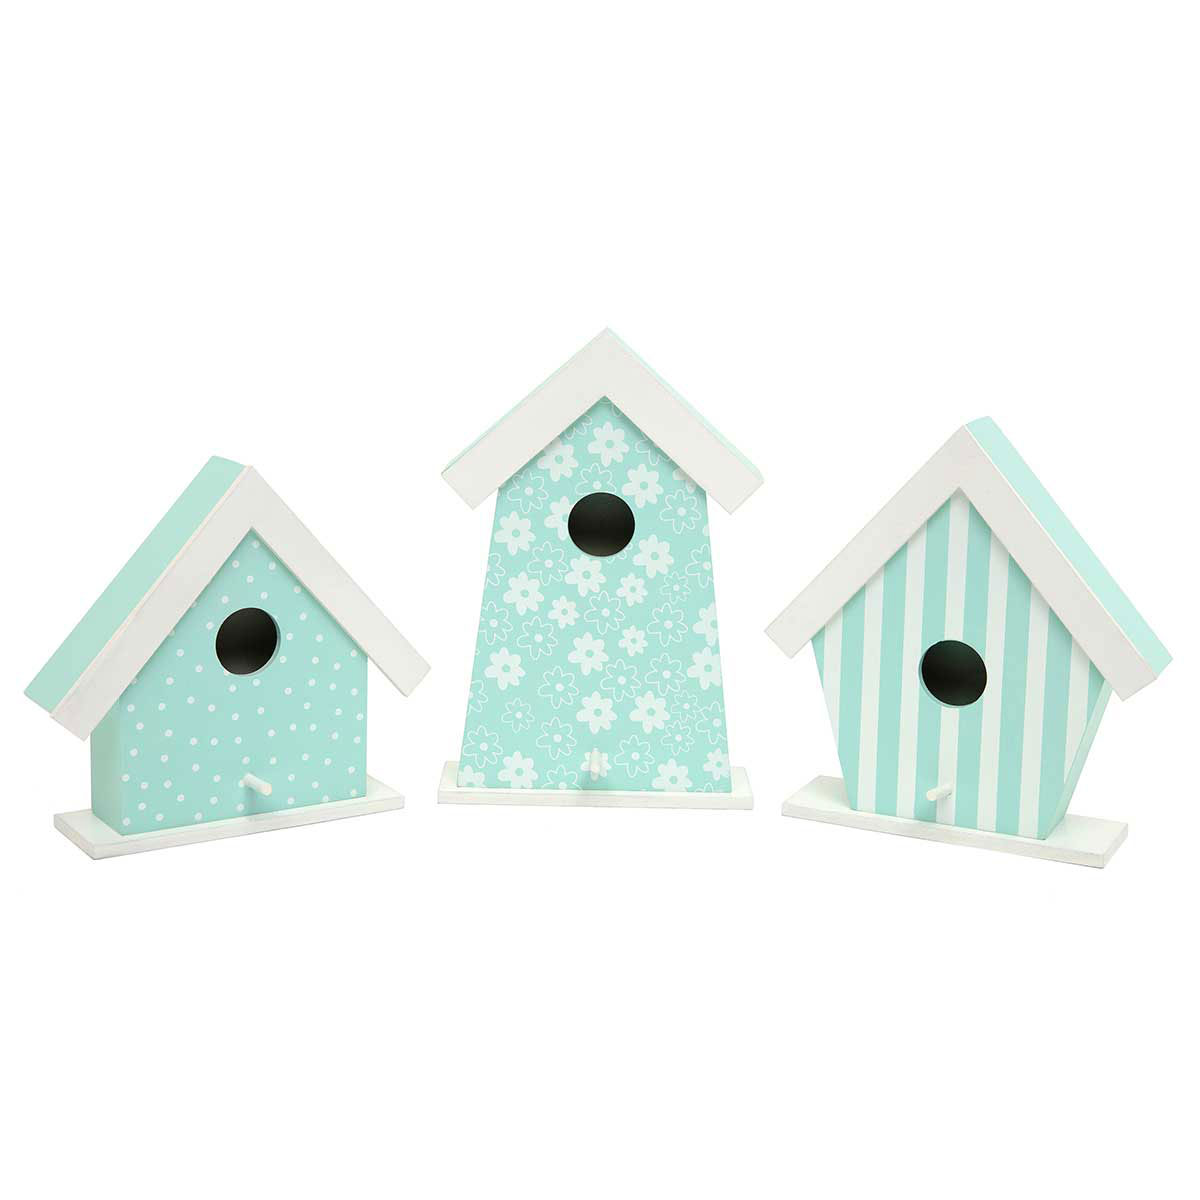 b50 BIRDHOUSE BLUE MEADOW STRIPE 6.75IN X 2.75IN X 7.25IN WOOD - Click Image to Close